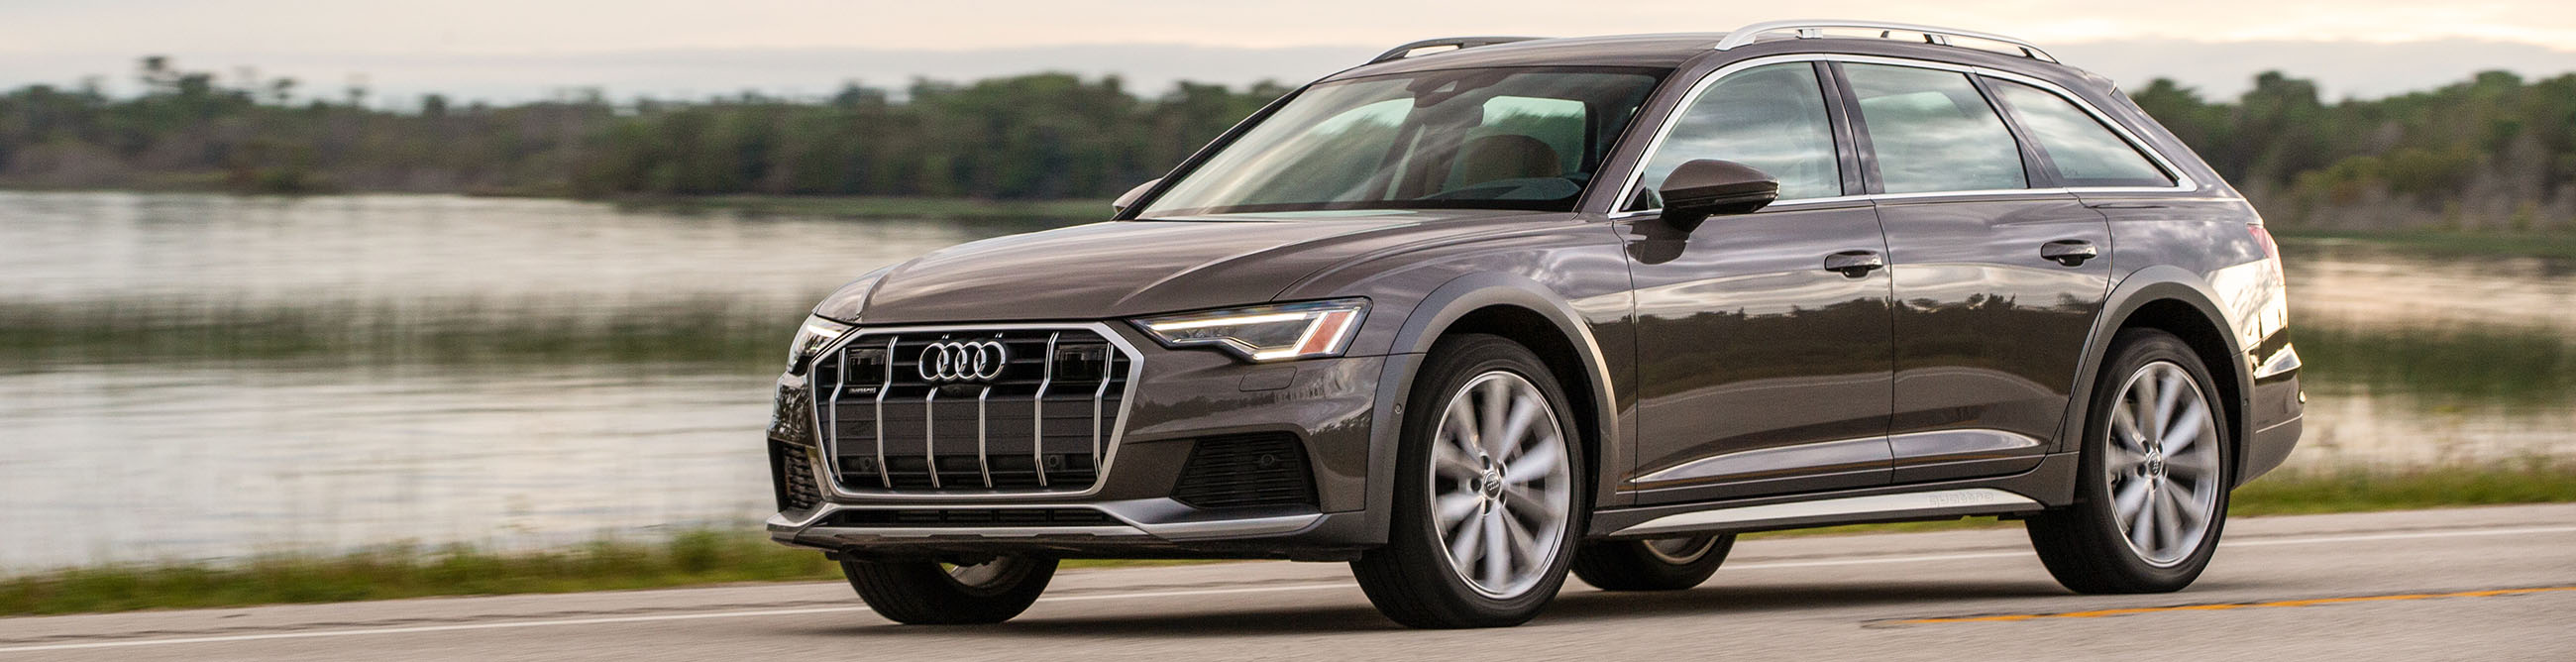 2020 Audi A6 Allroad review: Where we're going, we'll still need